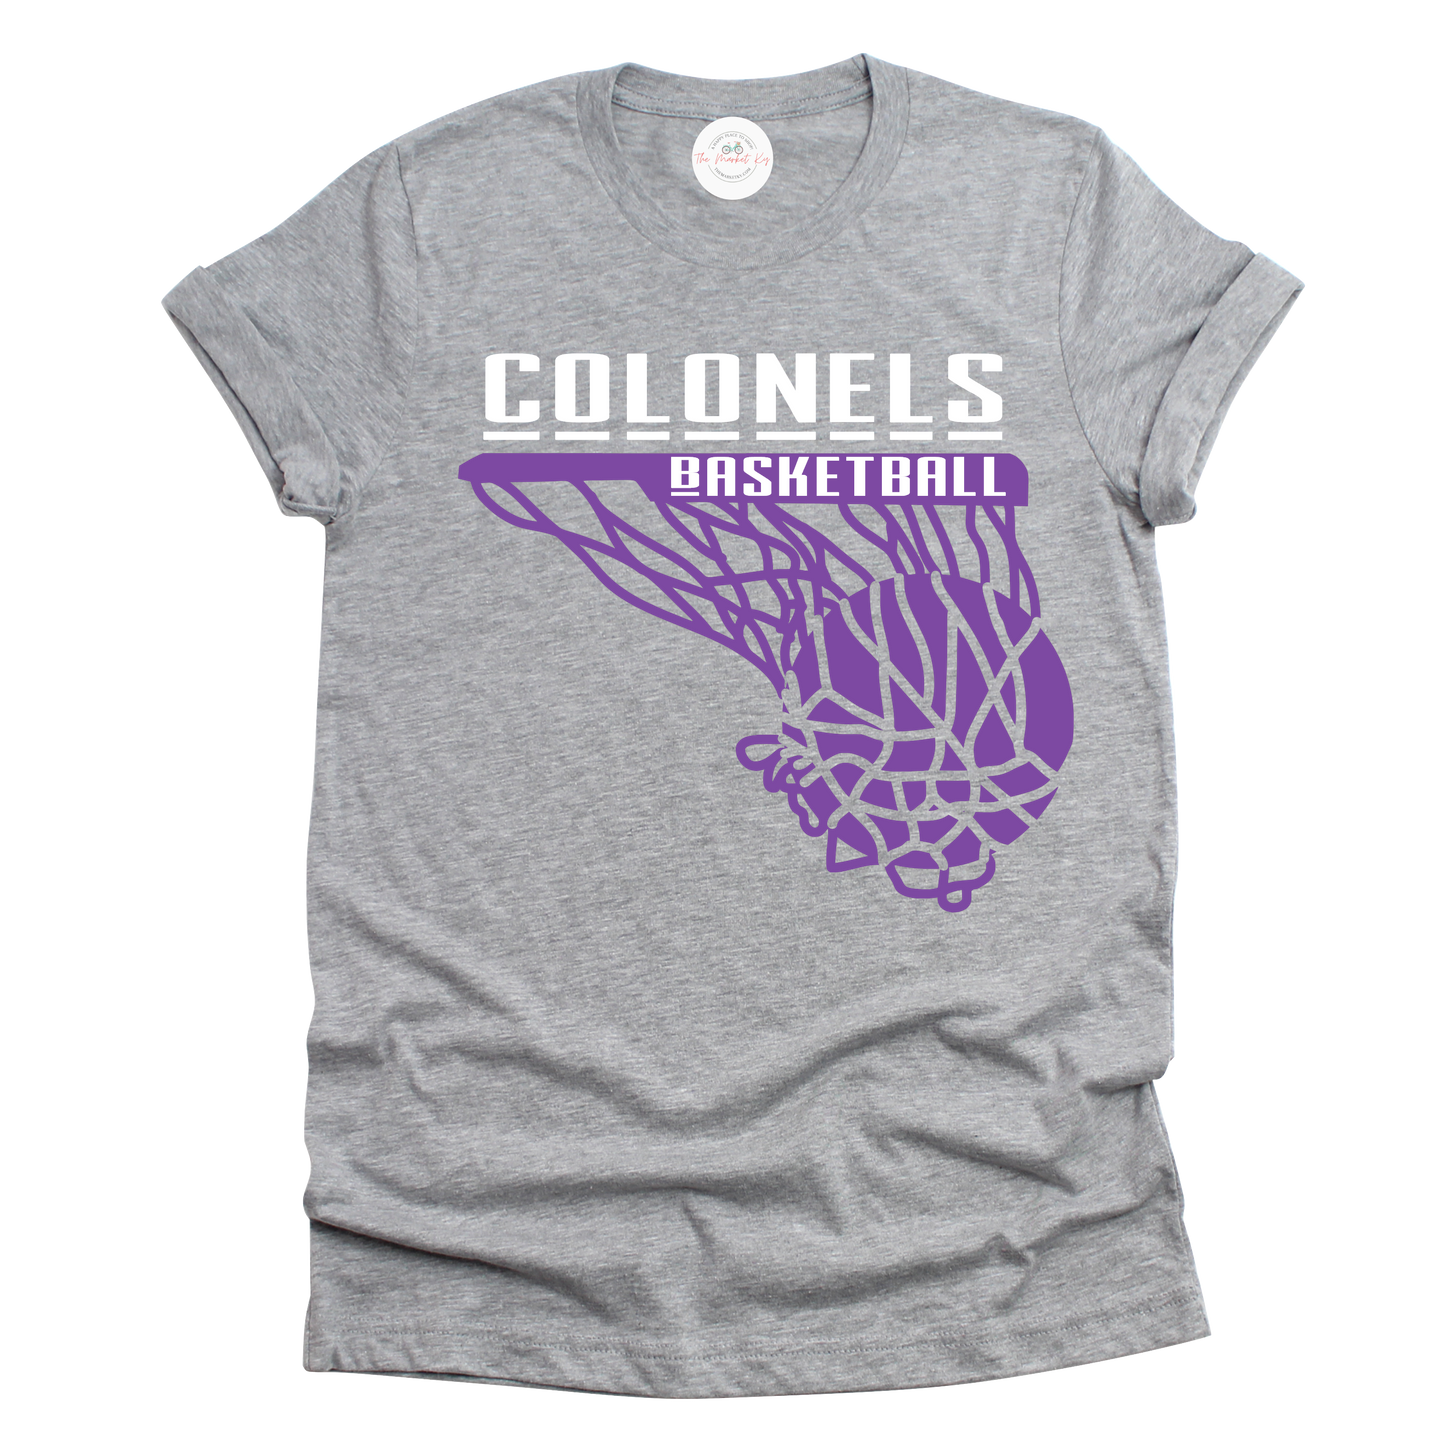 Nothing But Net- Colonels